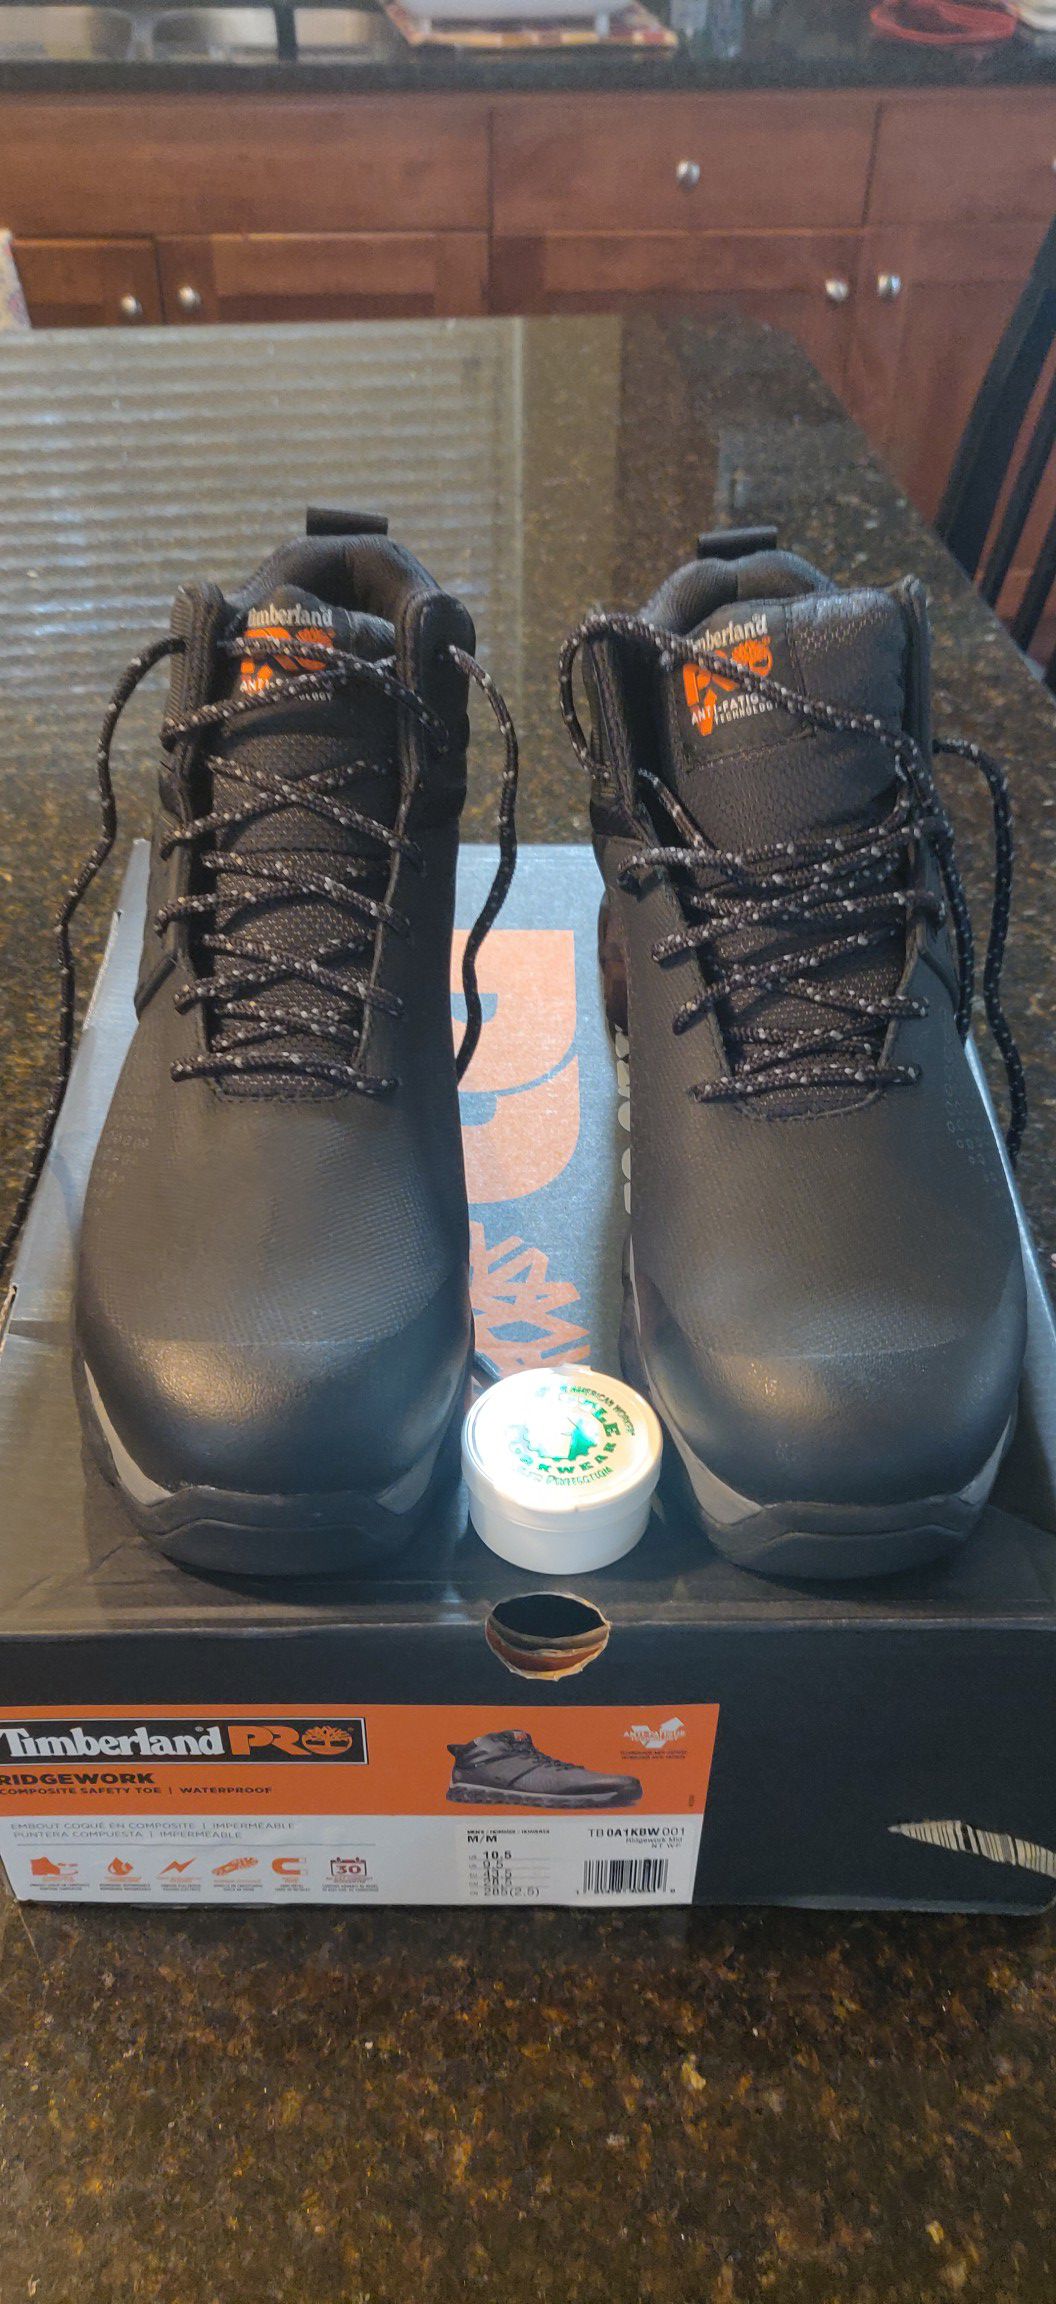 Timberland Pro Composite Toe work boots size 10.5